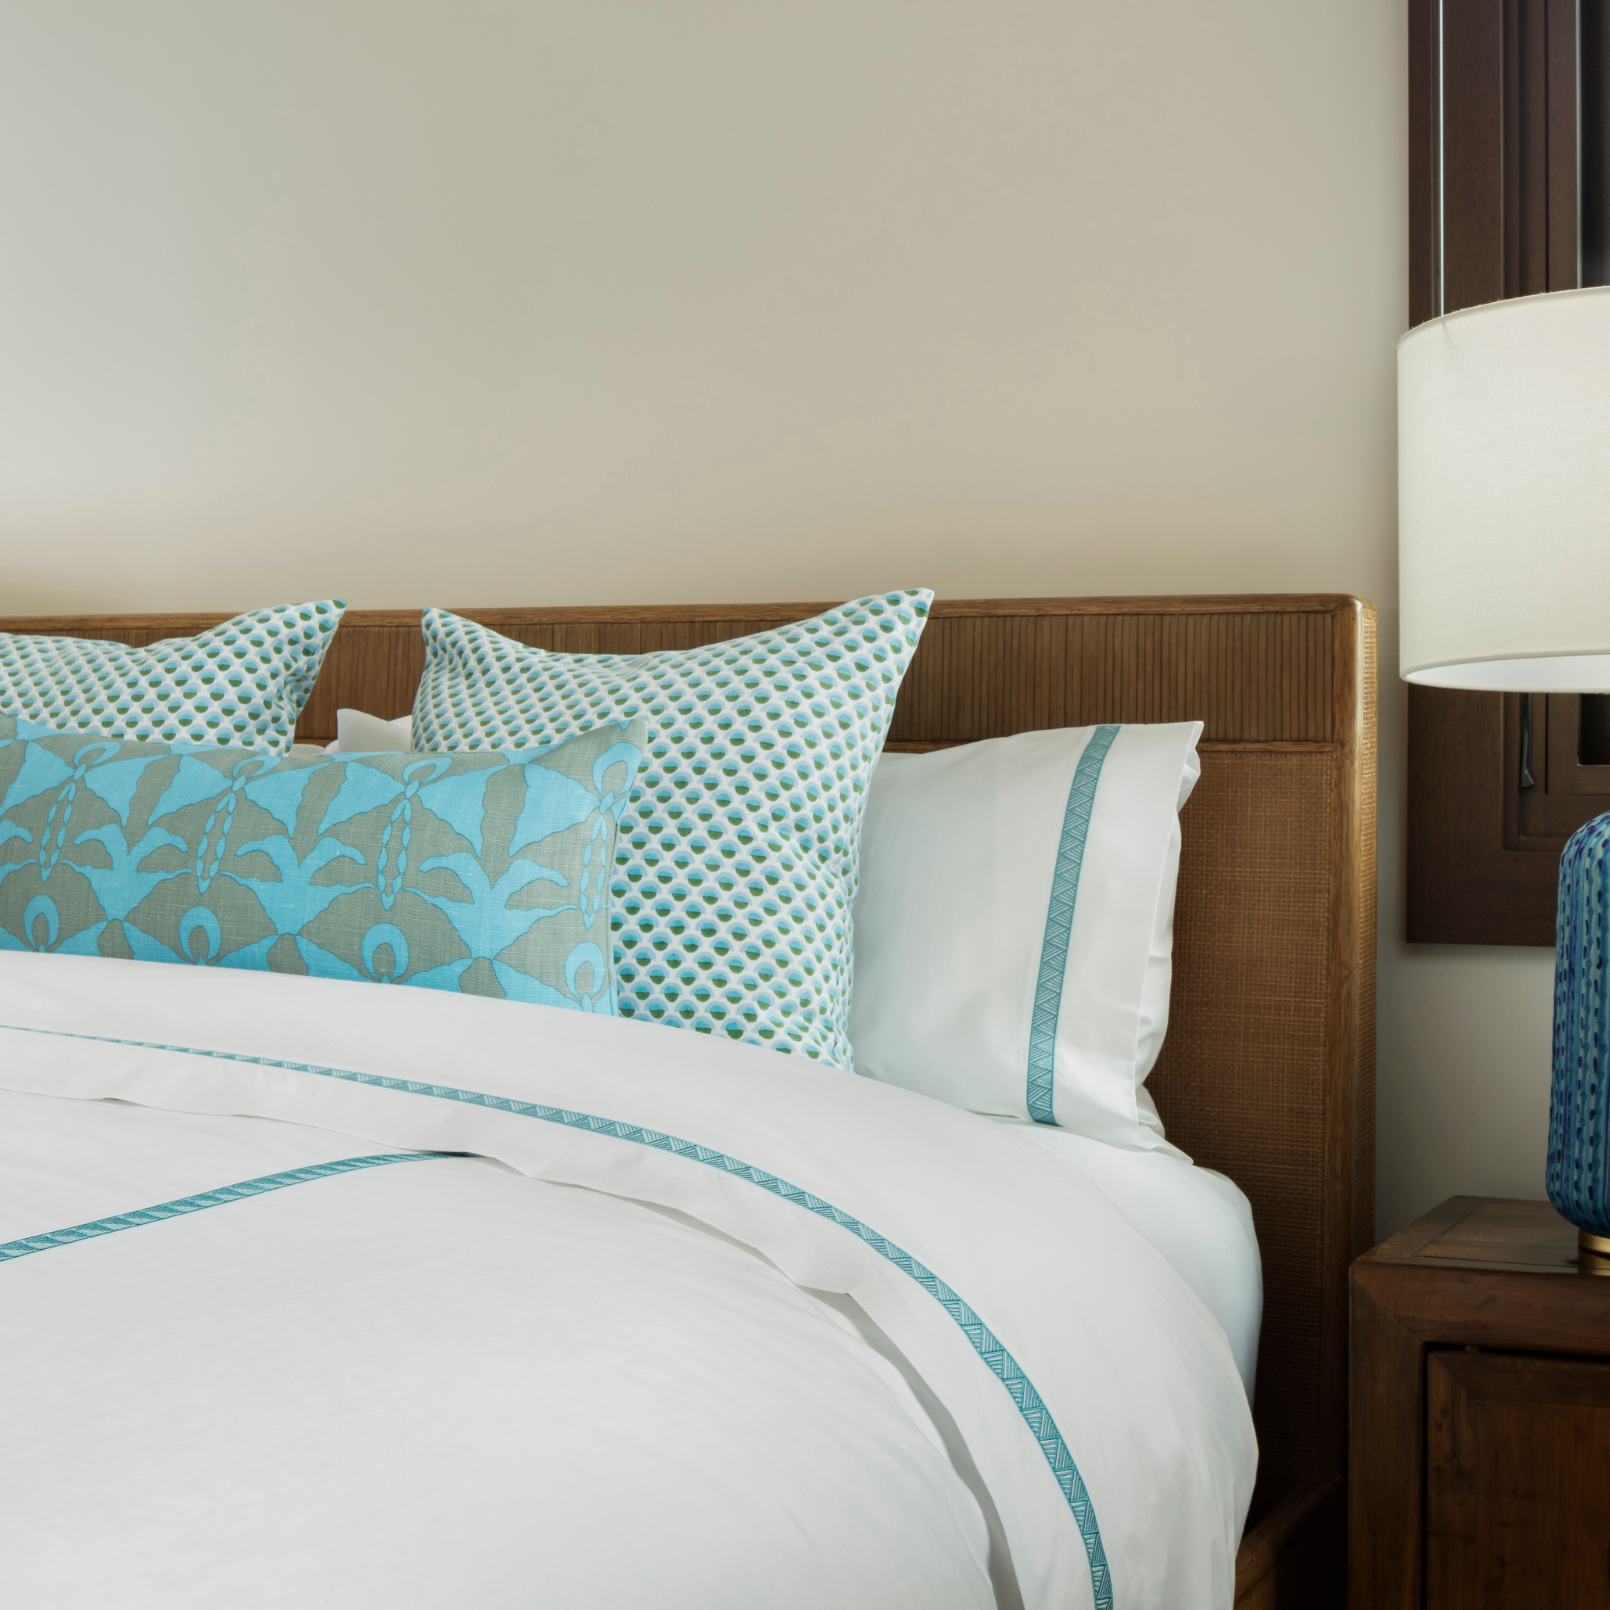 Averylily Weave Duvet Cover in White with embroidered trim in Sky Blue. 510-thread count cotton percale. Styled with Serena Dugan Studio decorative pillows.